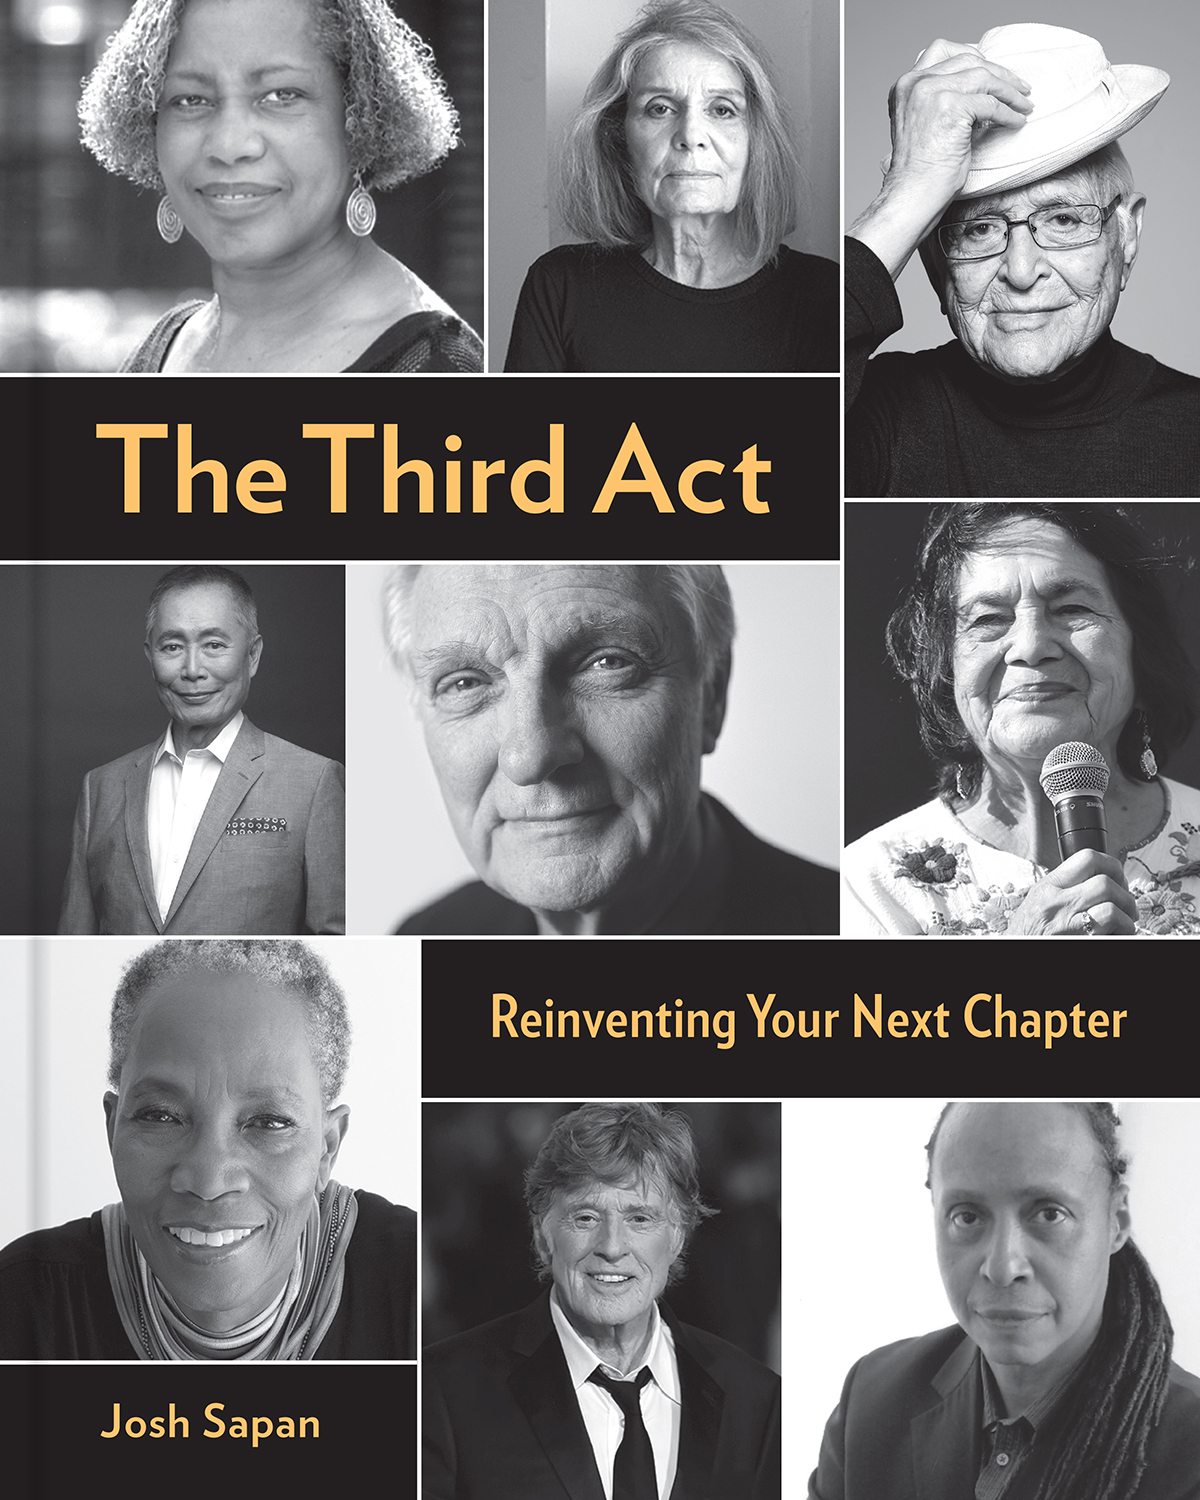 Cover of "The Third Act" book featuring black and white photos of older celebrities